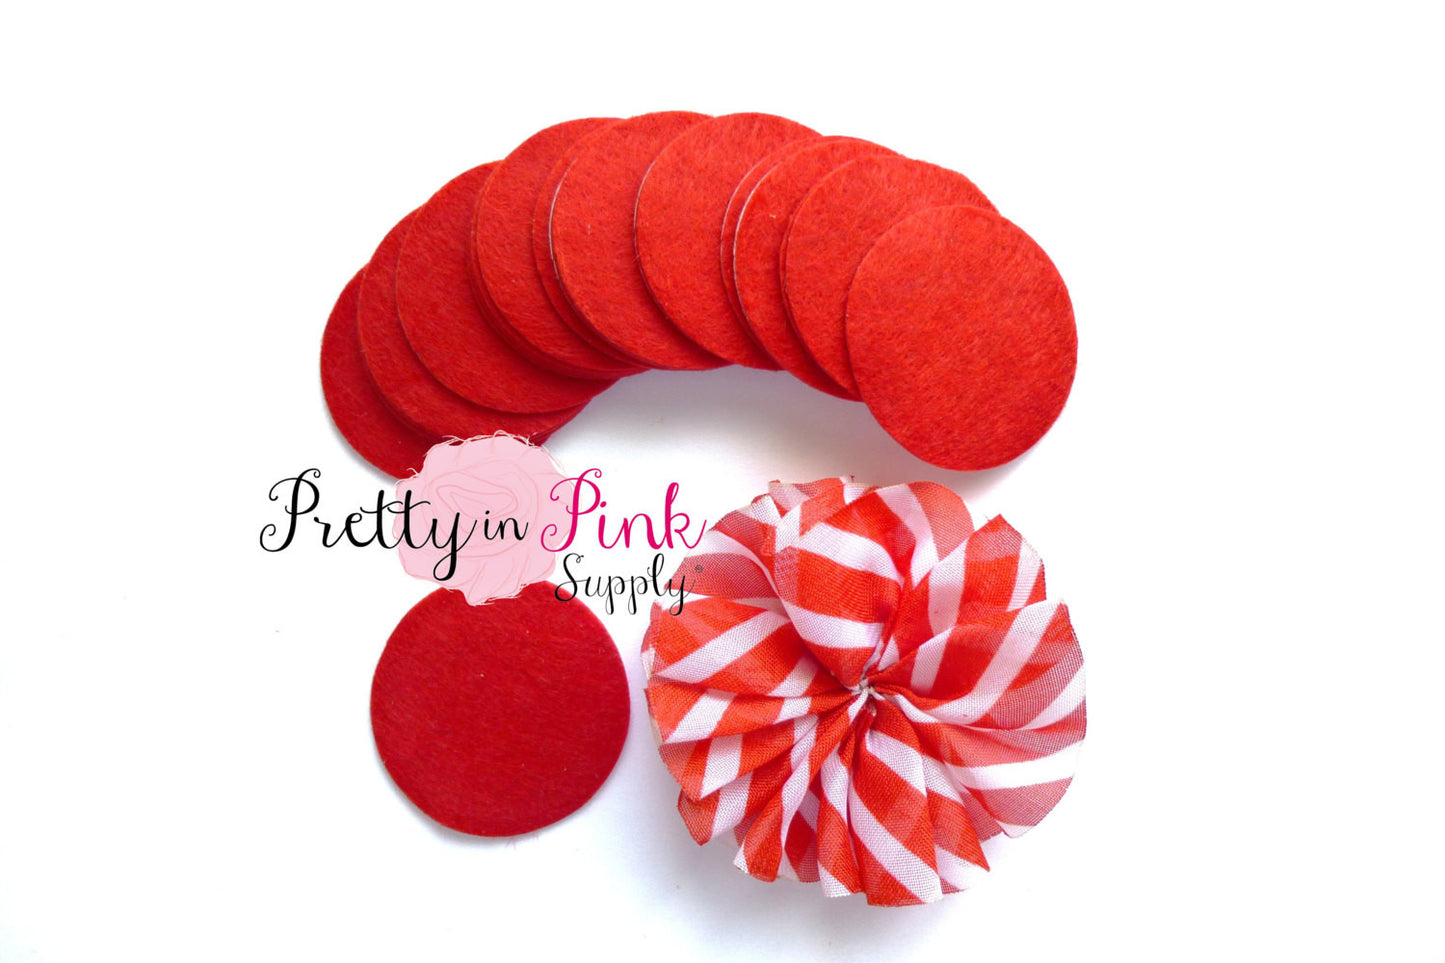 1.5" Red Felt Circles- Self Adhesive - Pretty in Pink Supply